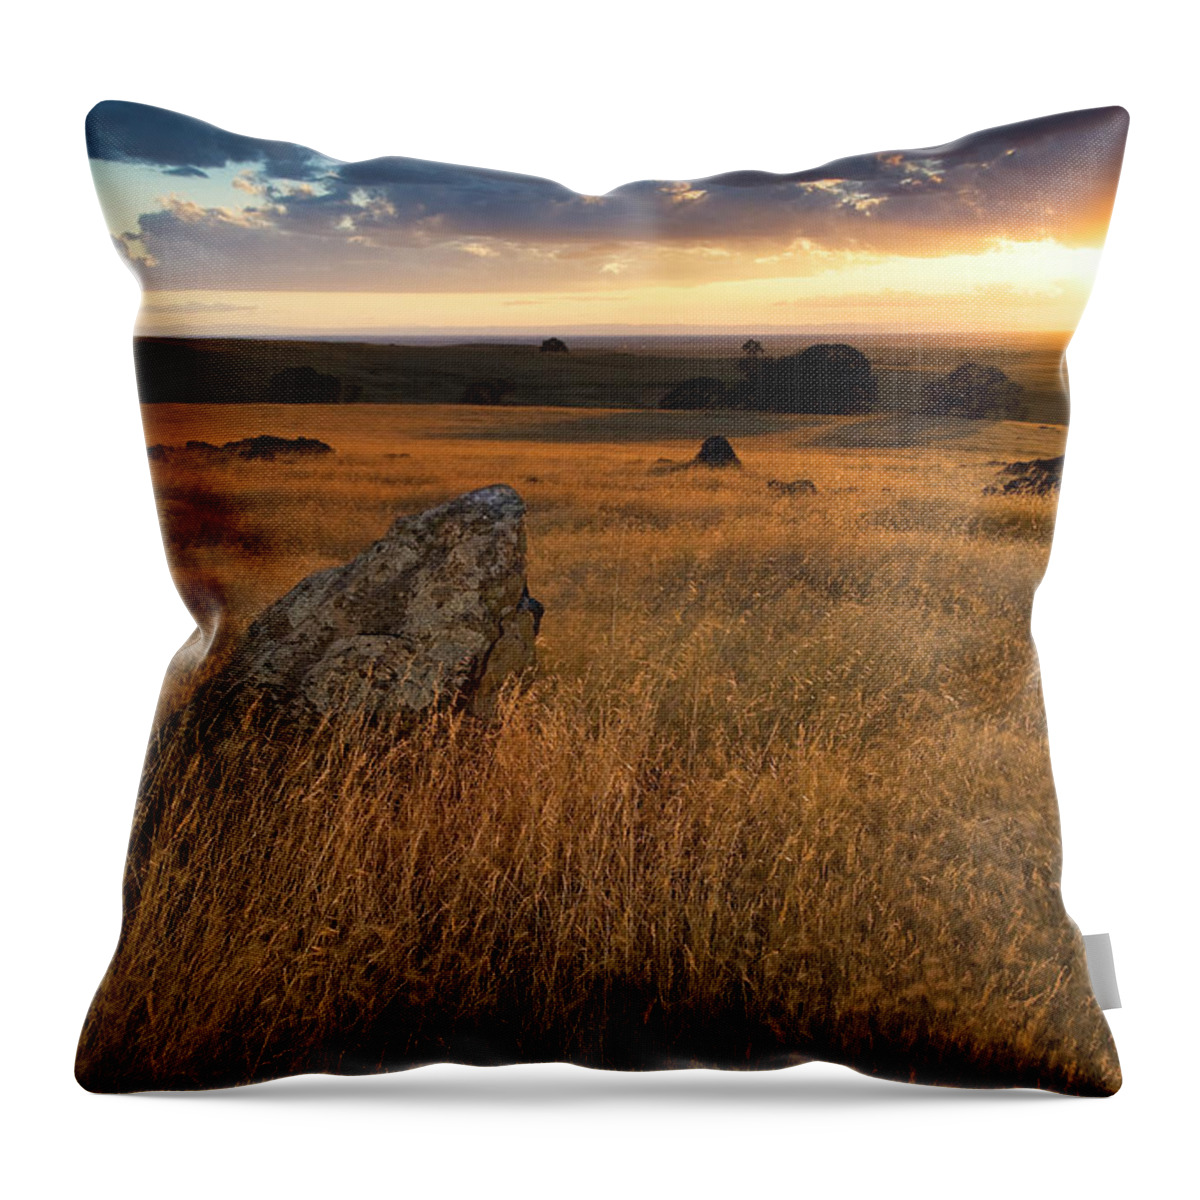 Beauty In Nature Throw Pillow featuring the photograph Sunset On Sacramento Valley by Josh Miller